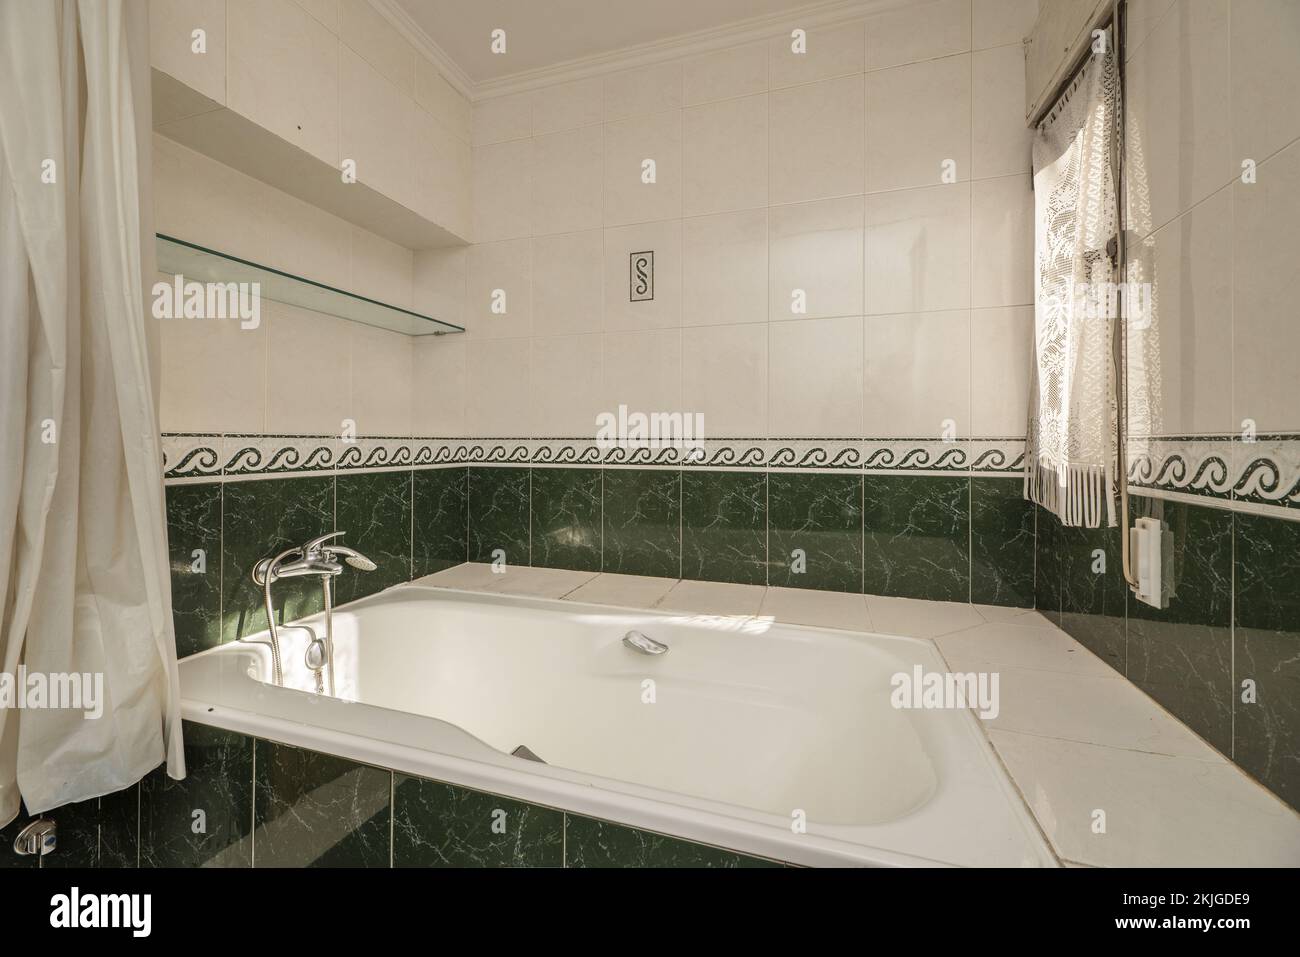 Green tiled bathroom and a white Jacuzzi tub and a window with white net curtains Stock Photo